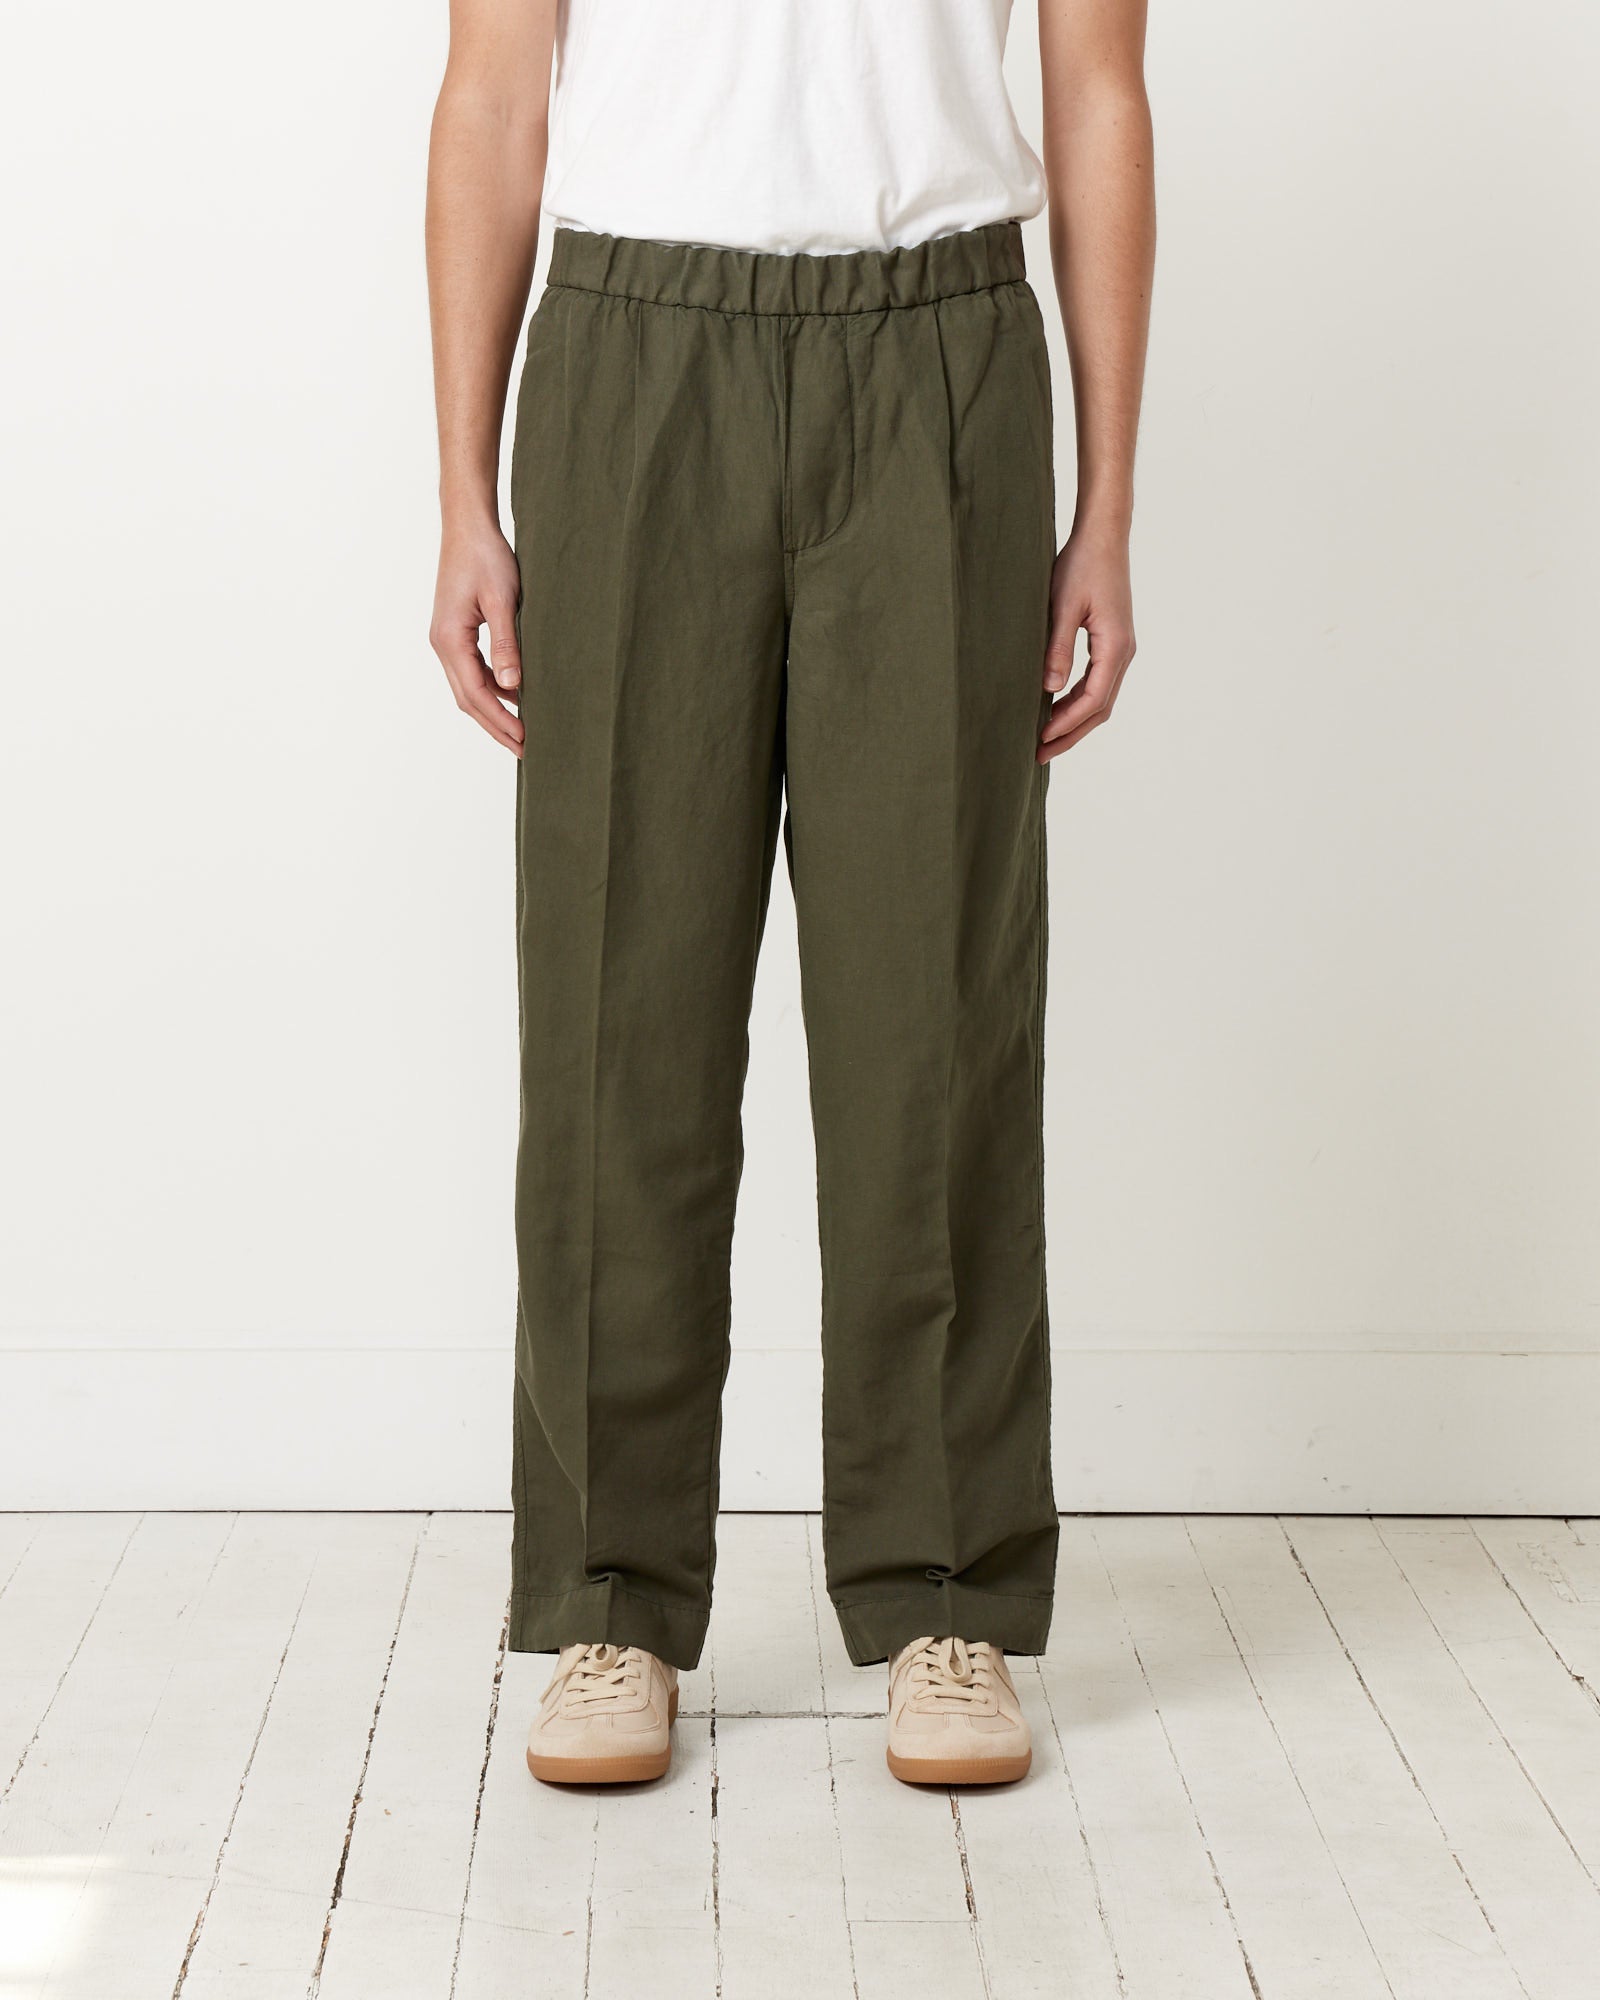 Park Pant in Olive